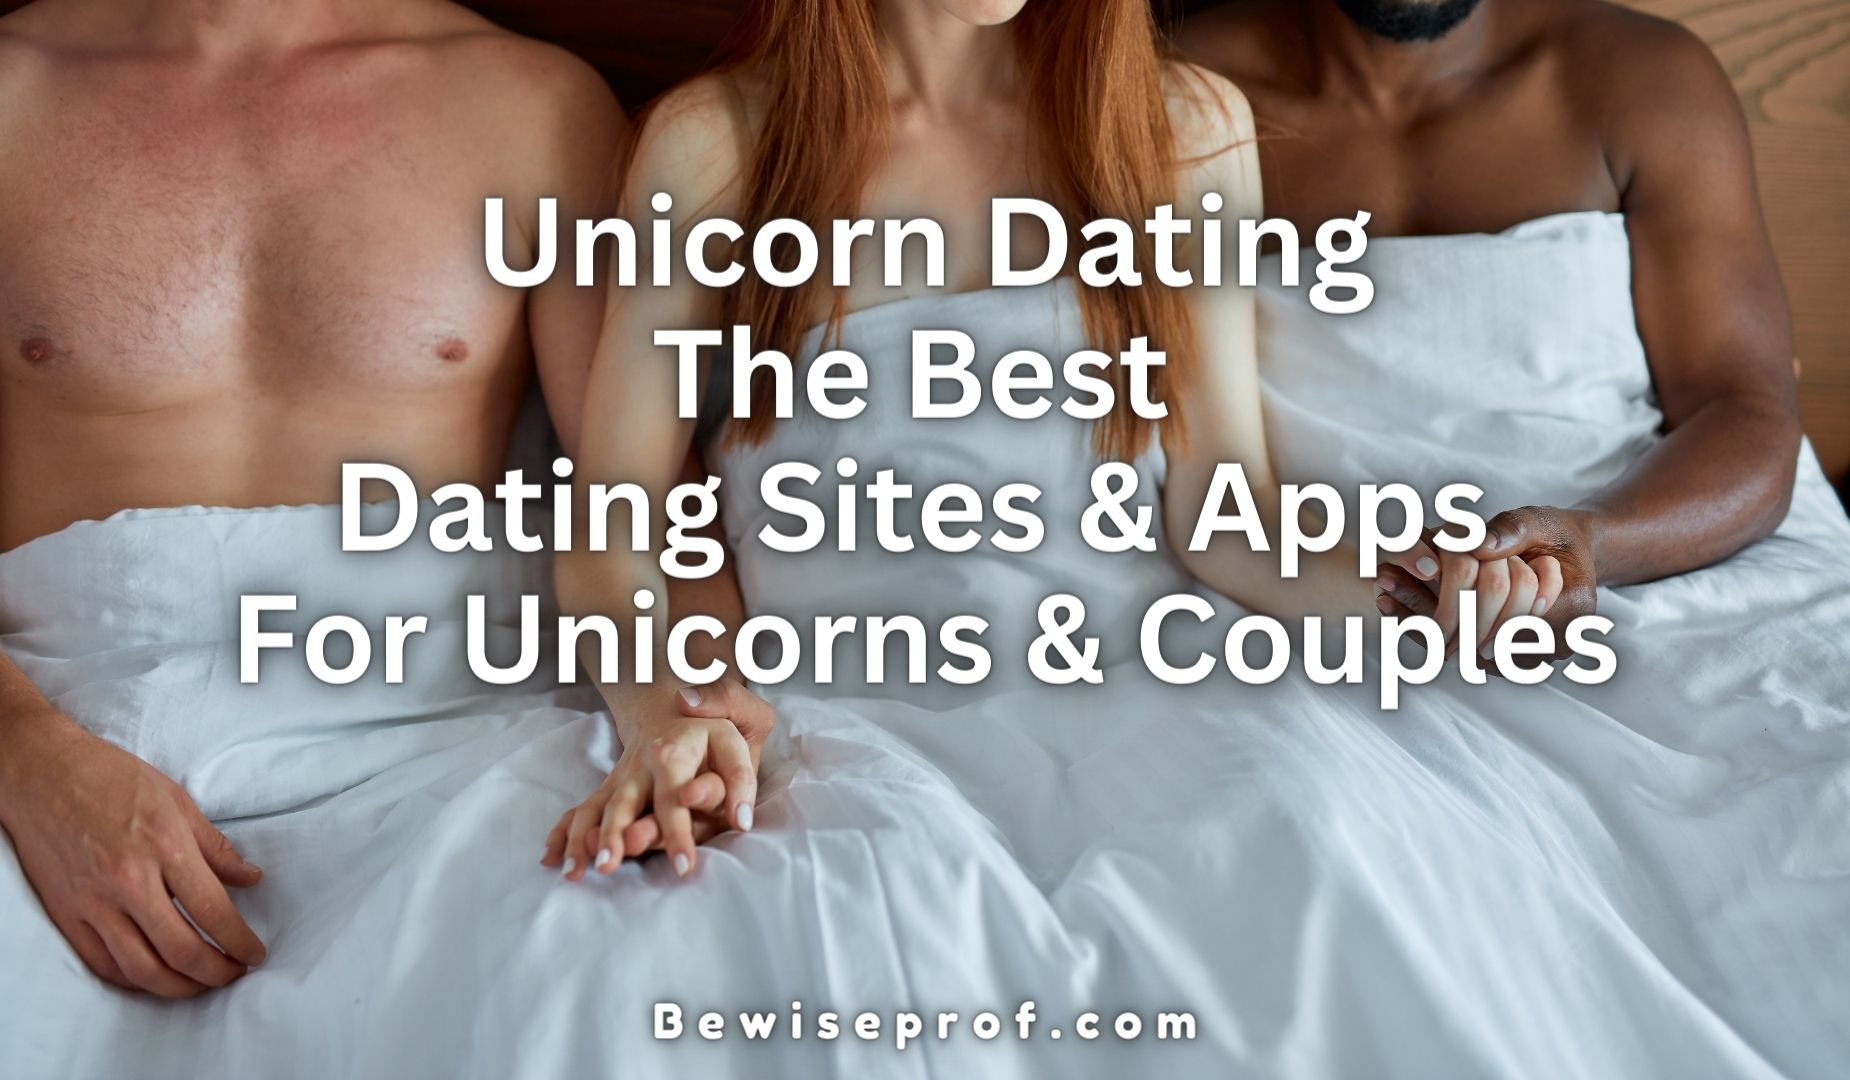 Unicorn Dating – The Best Dating Sites And Apps For Unicorns And Couples